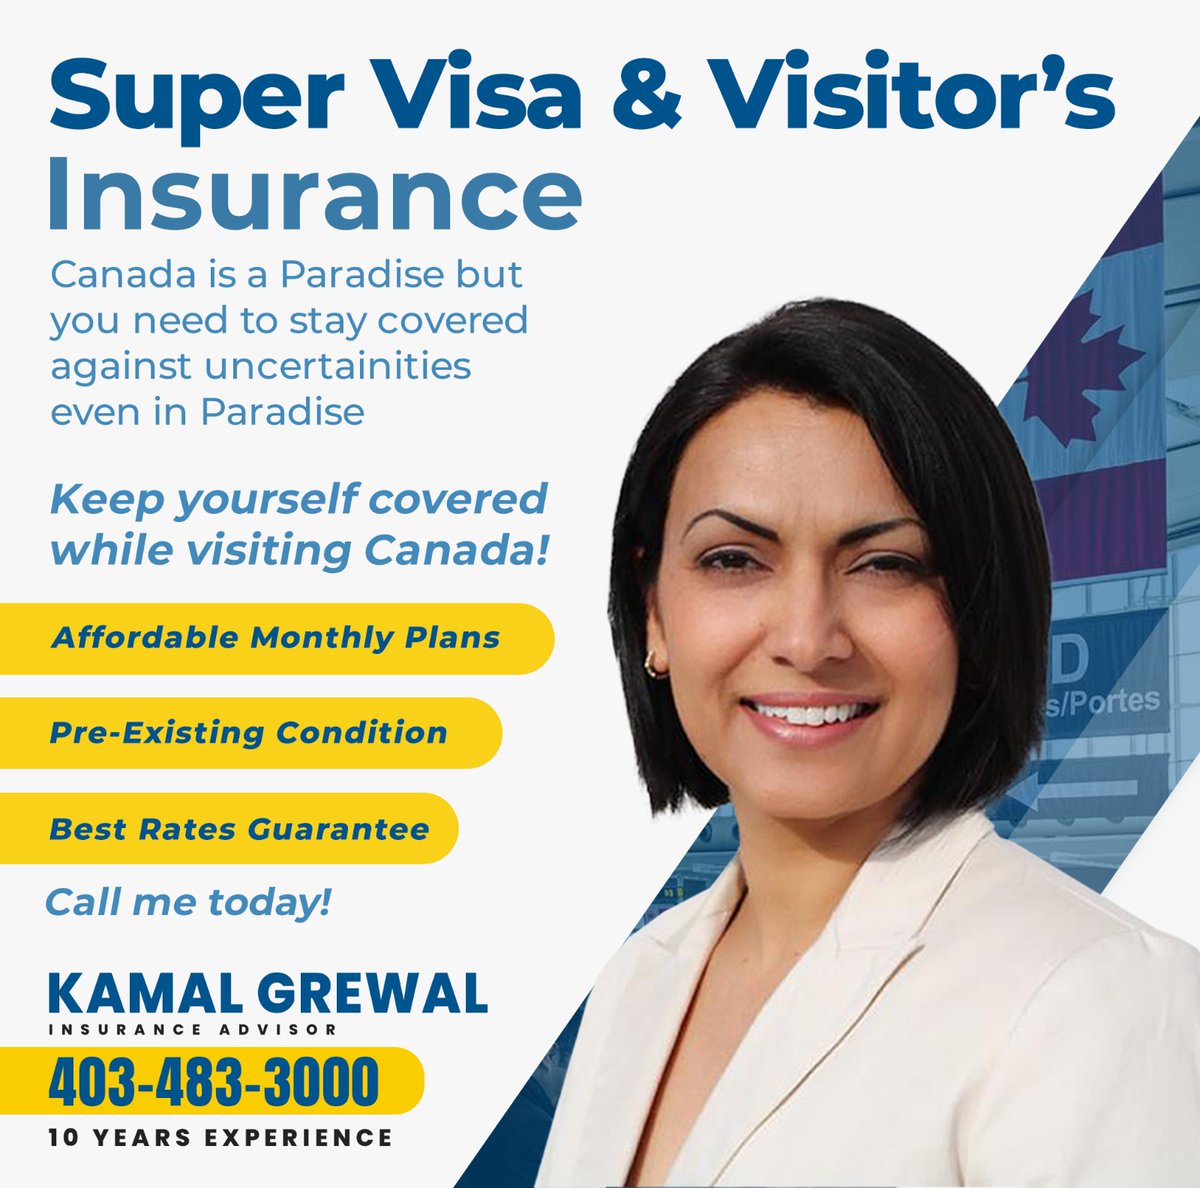 Secure your health and finances with Super Visa and Visitors Insurance coverage with me today!

#kamal #kamalgrewal #calgary #parents #pricehike #visitingtocanada #punjabinsurance #secure #coverage #supervisainsurance #visitorinsurance #criticalillnessinsurance #canada